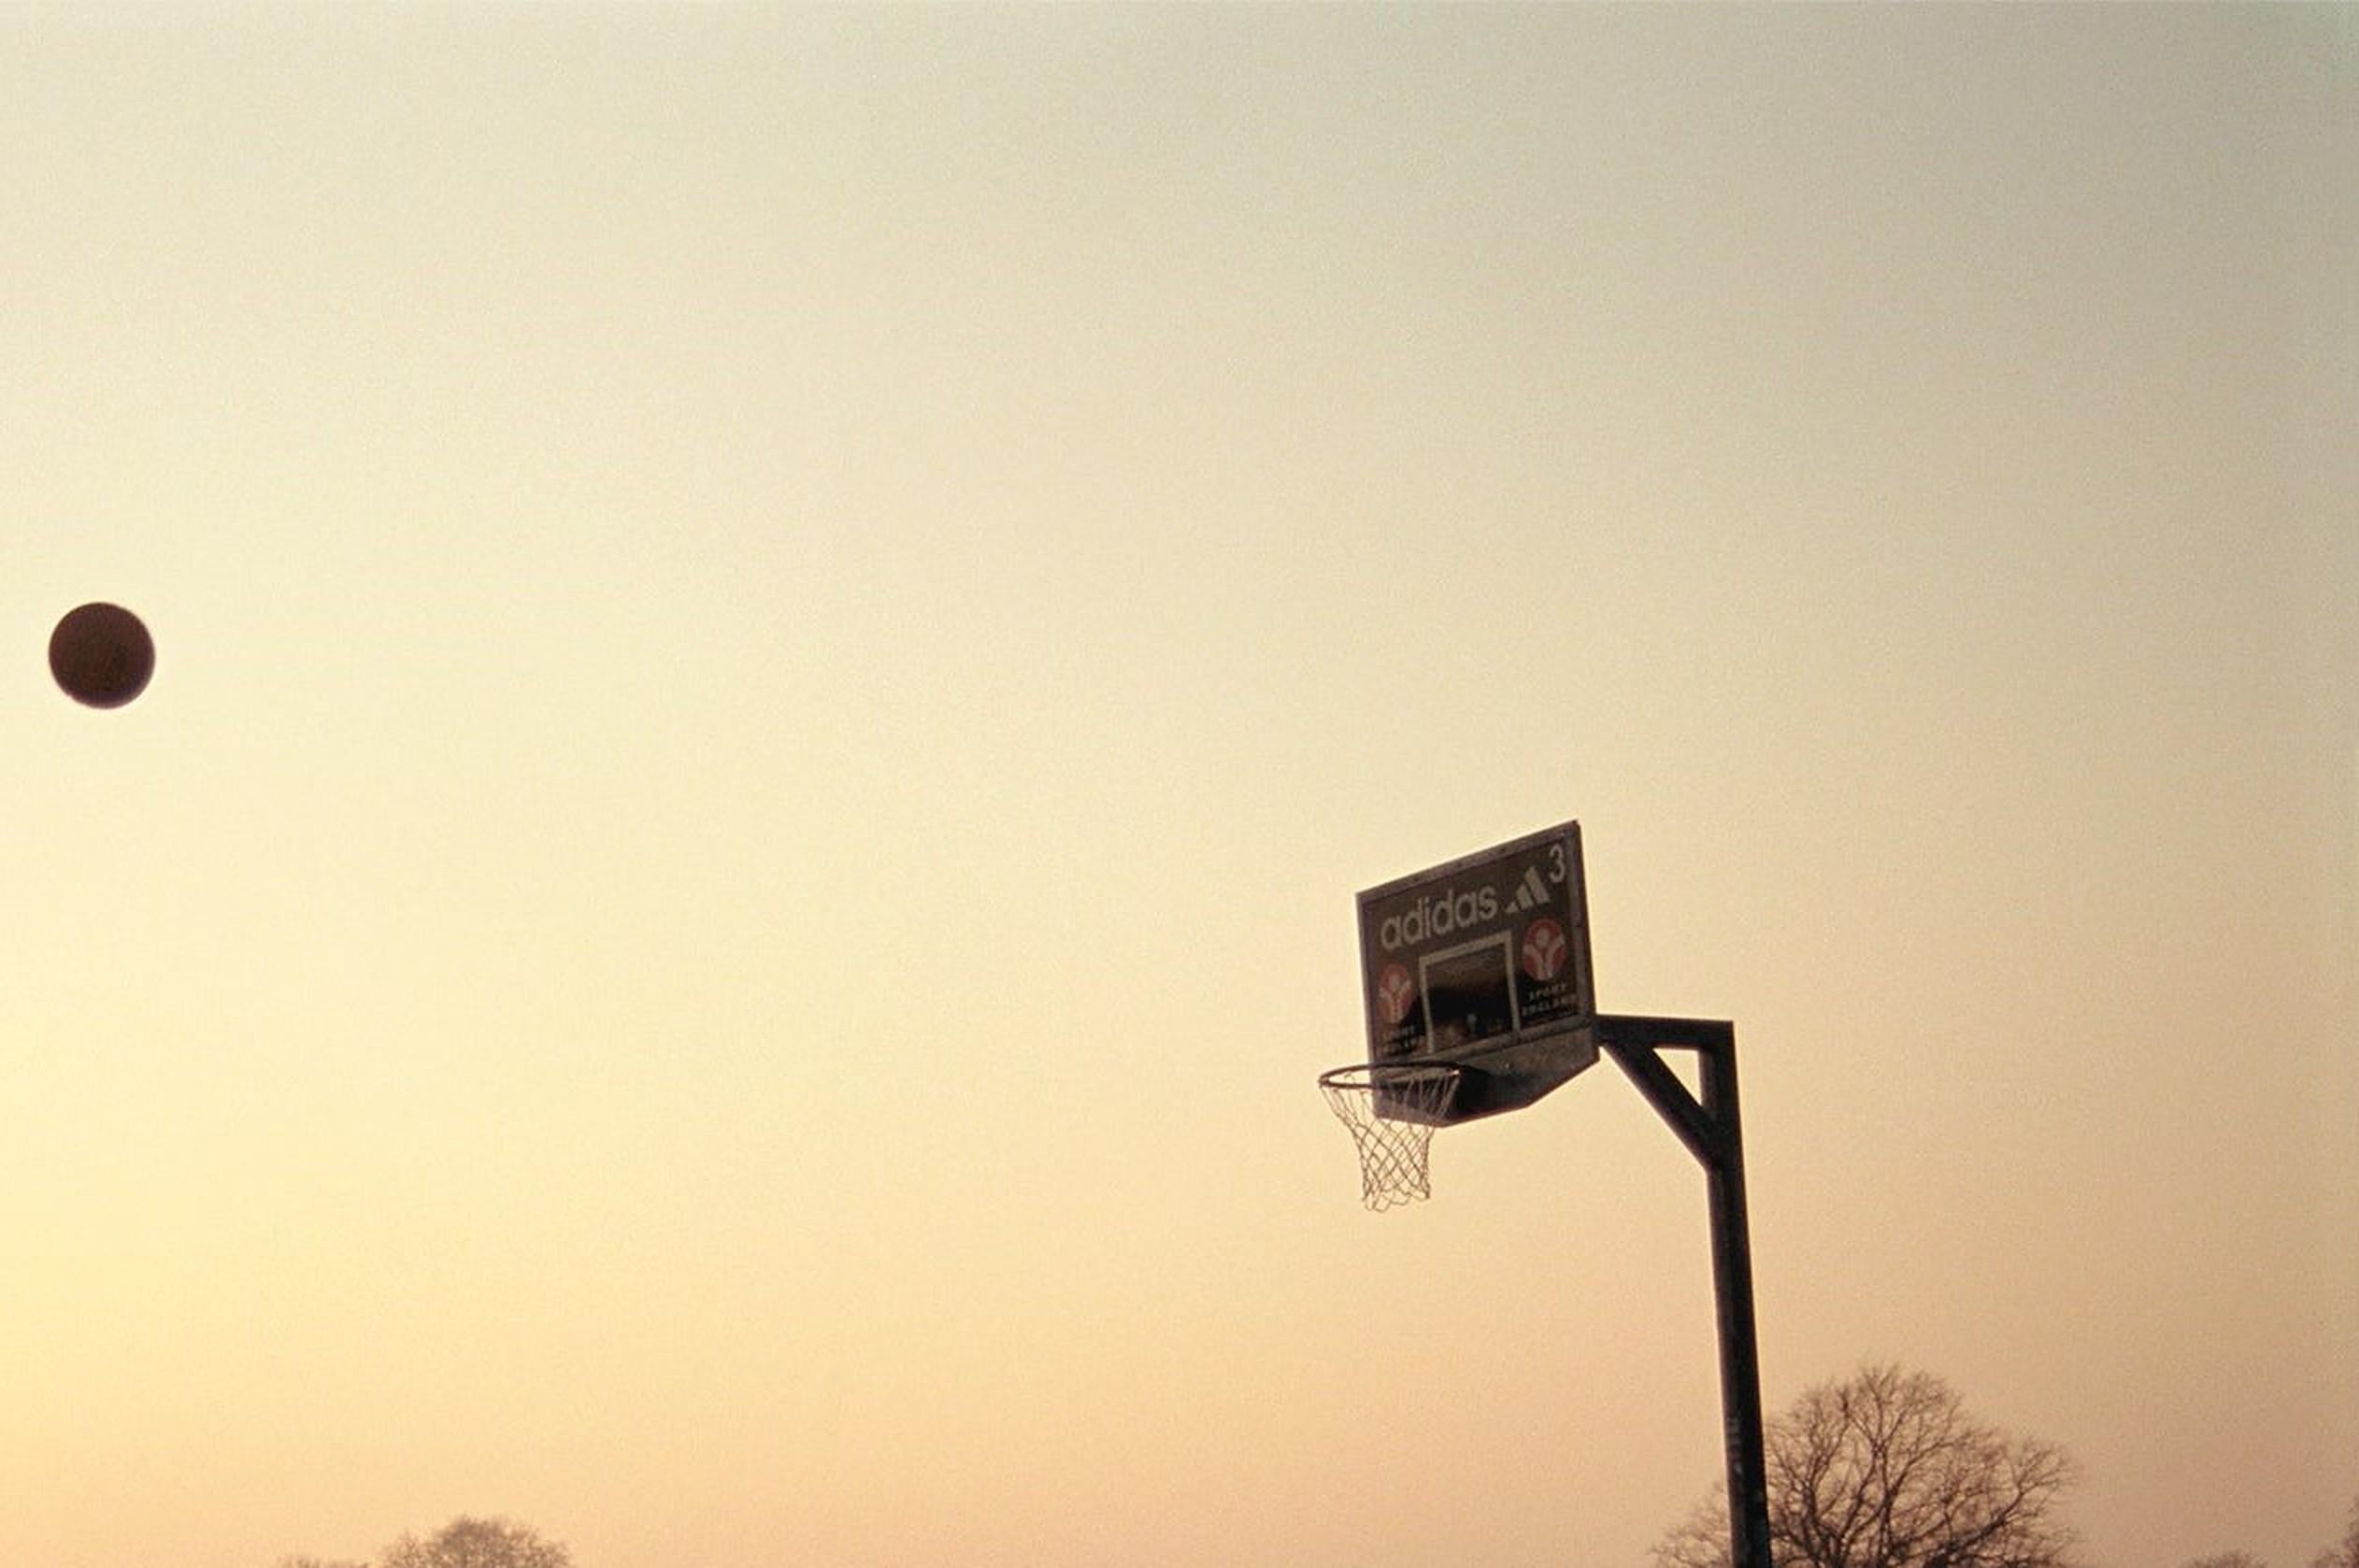 Please be aware that the US recently imposed an import duty on photographs printed in the last 20 years which may apply if you are purchasing and importing this to the US.

Basketball, Clapham I is a stunning C-Type Print in an Edition of 25 in this